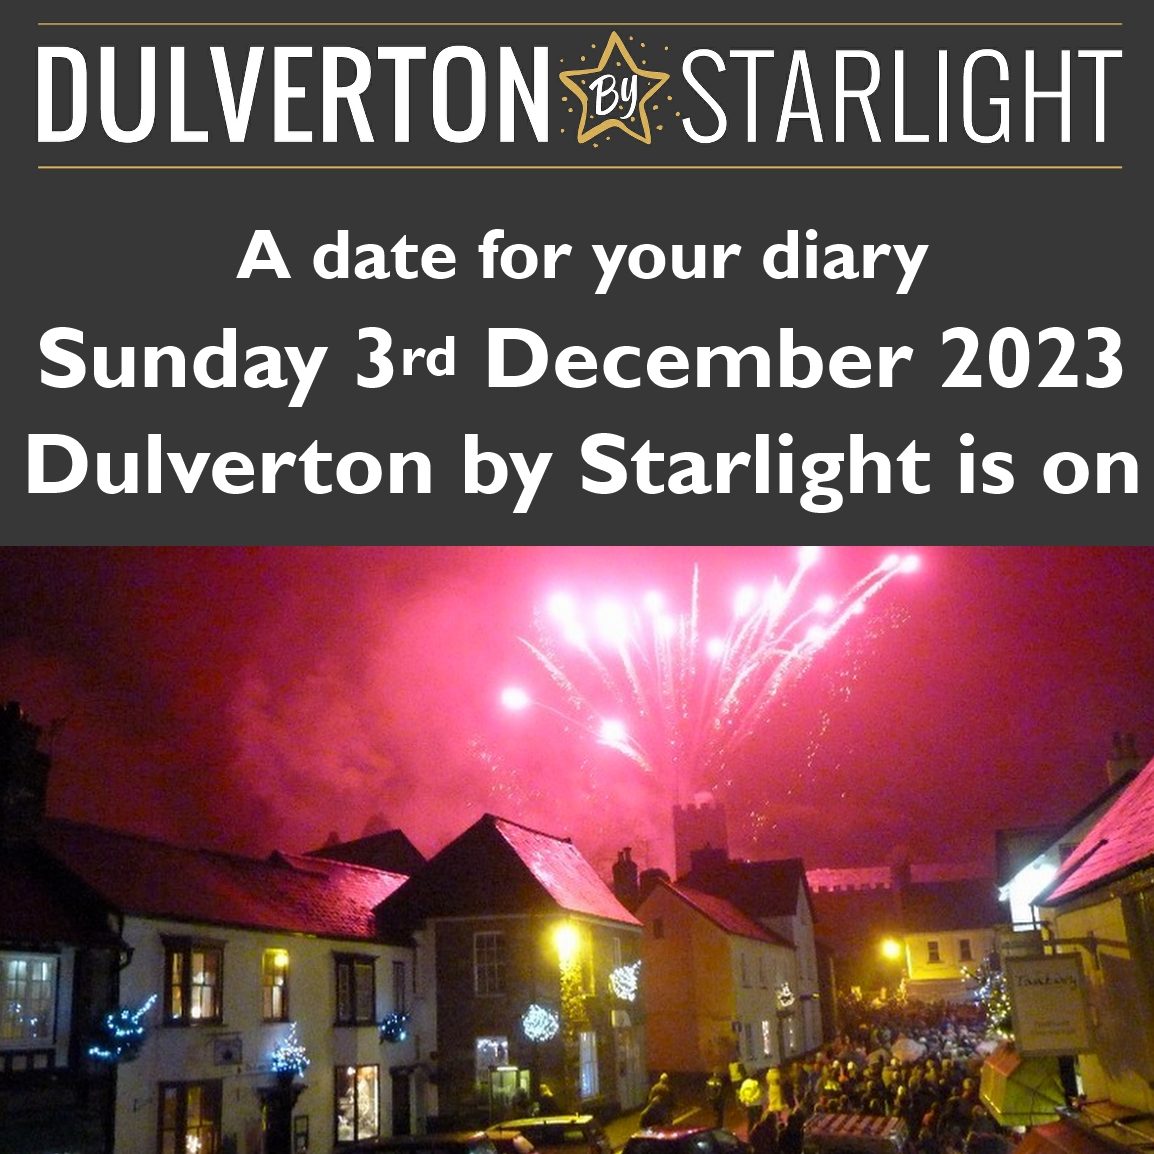 Dulverton By Starlight Save the Date poster with white text on a grey background reading "Dulverton by Starlight - A date for your diary Sunday 3rd December 2023 Dulverton by Starlight is on" and then there is a picture of last year's Dulverton by Starlight with the village Christmas market in action and the sky illuminated pink with fireworks